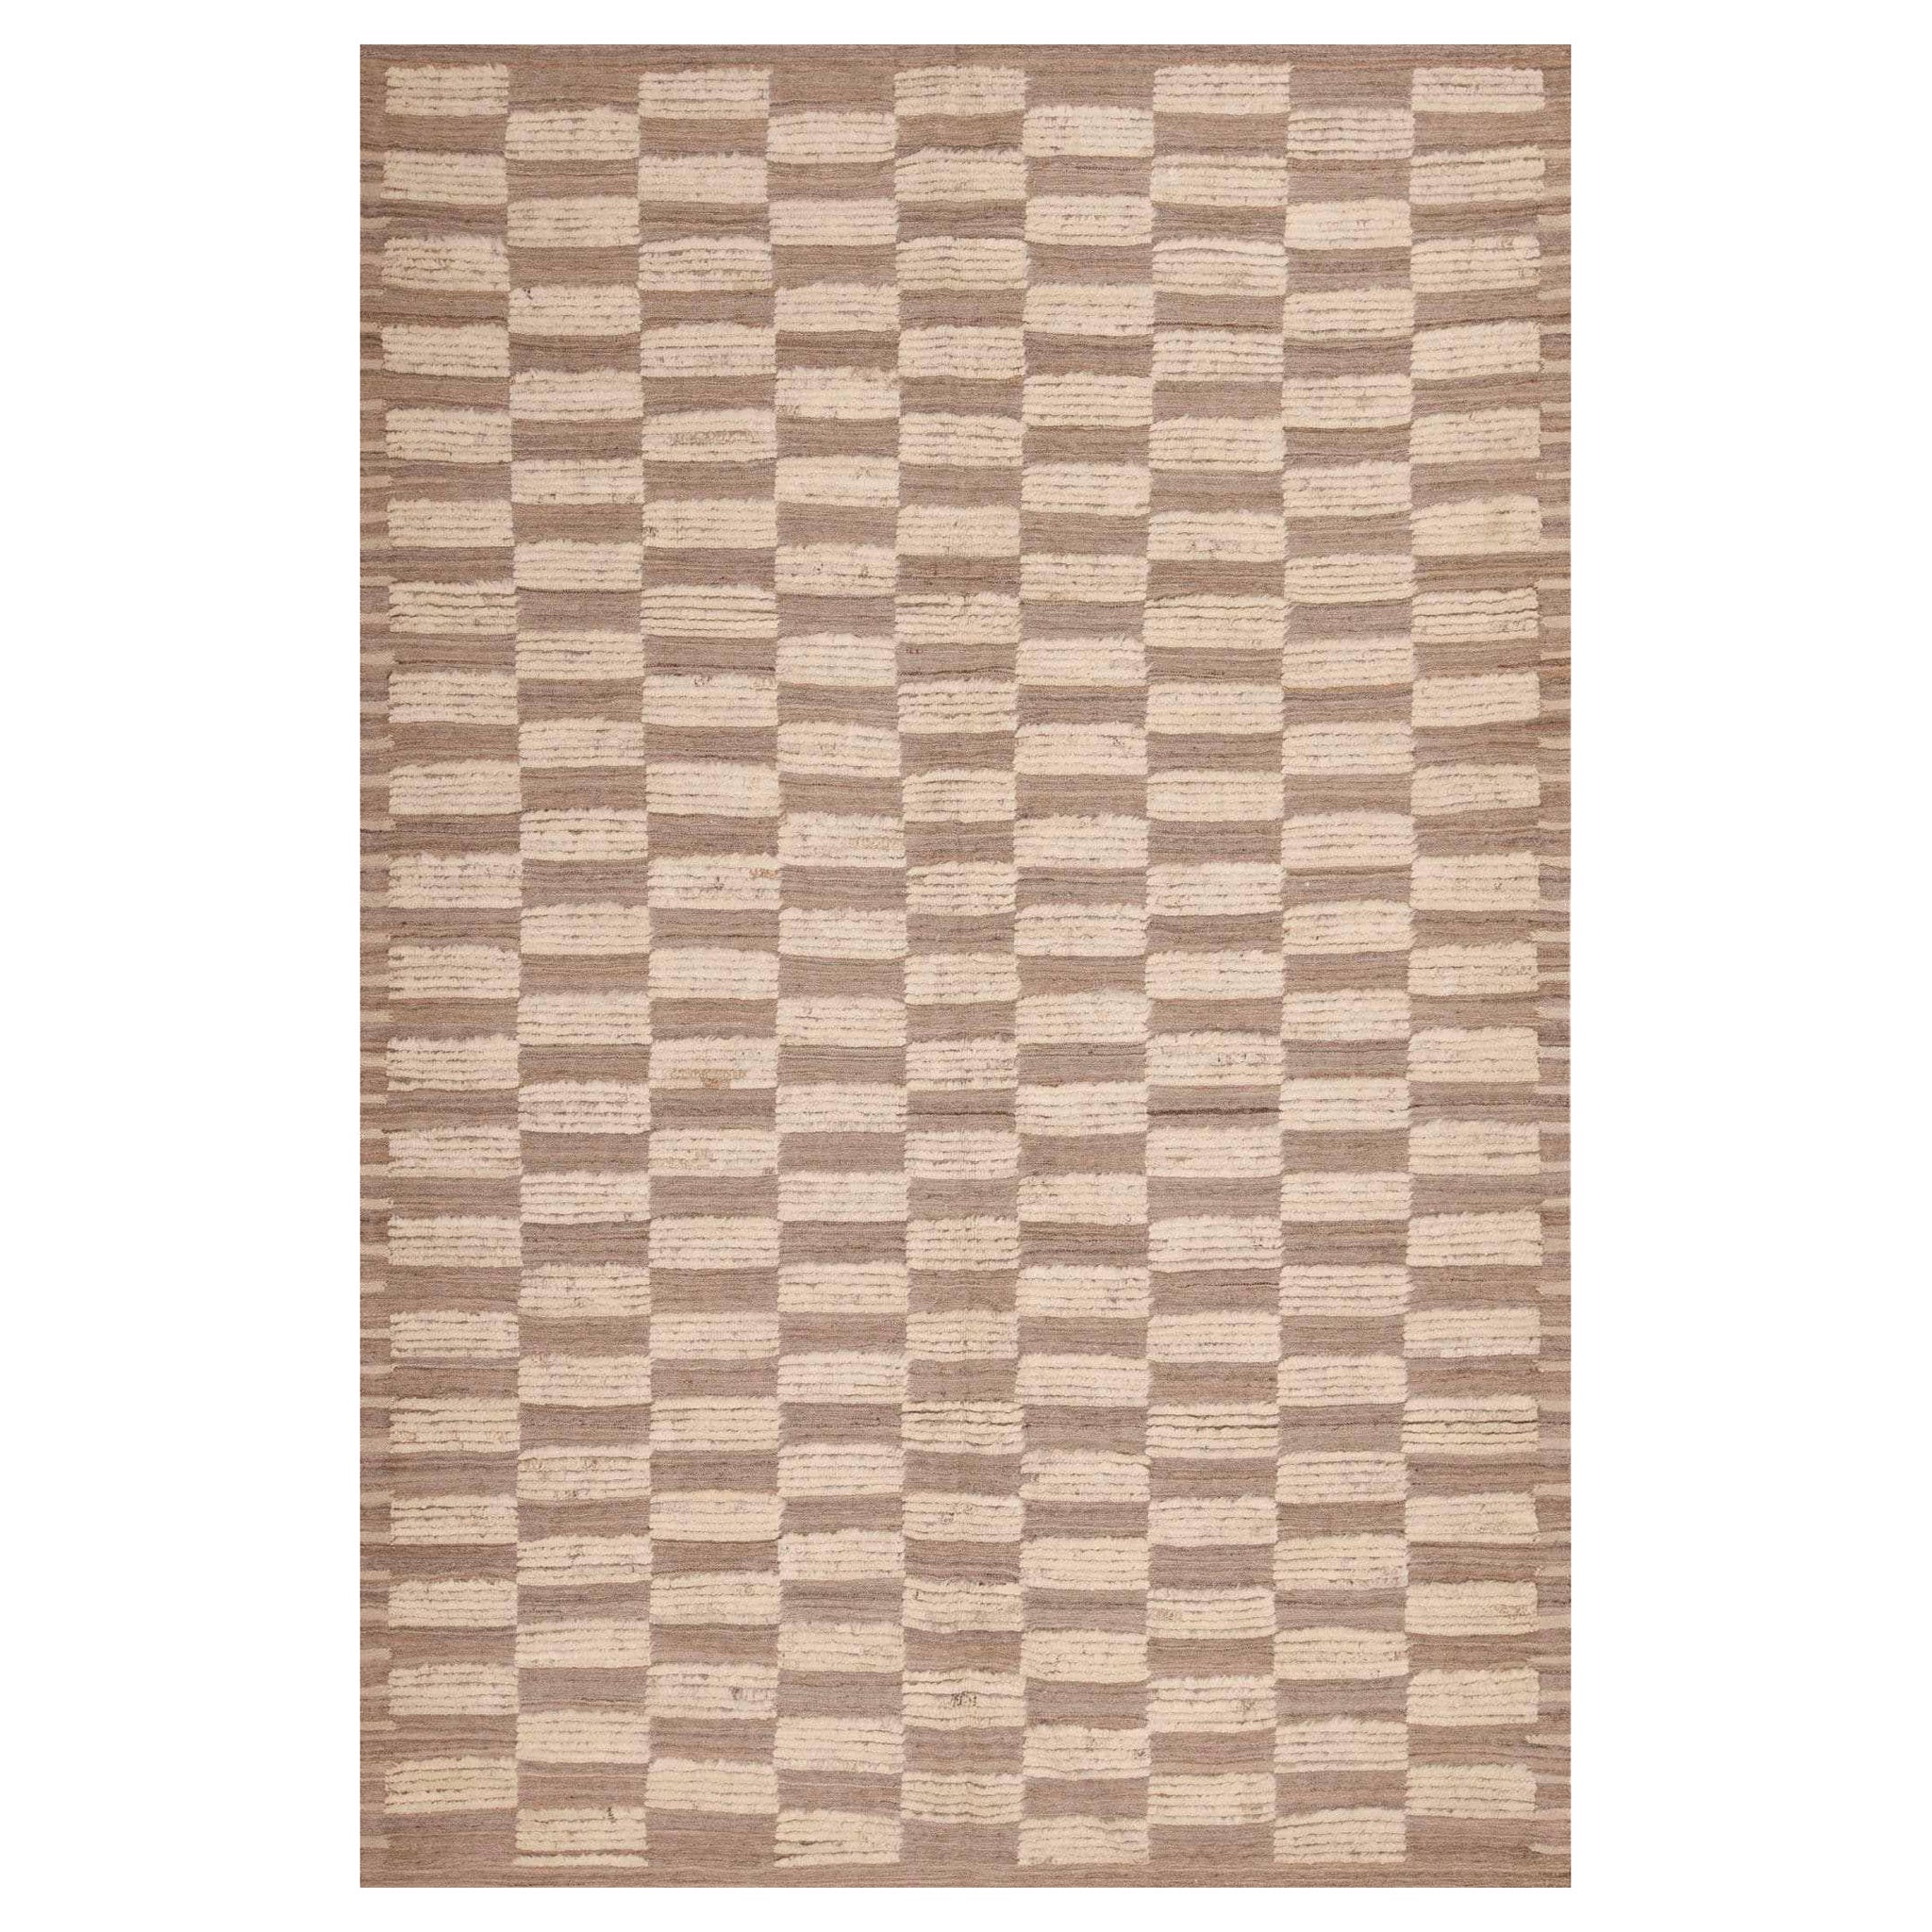 Nazmiyal Collection Modern Light Grey and Ivory Color Room Size Rug 6'6" x 9'6" For Sale